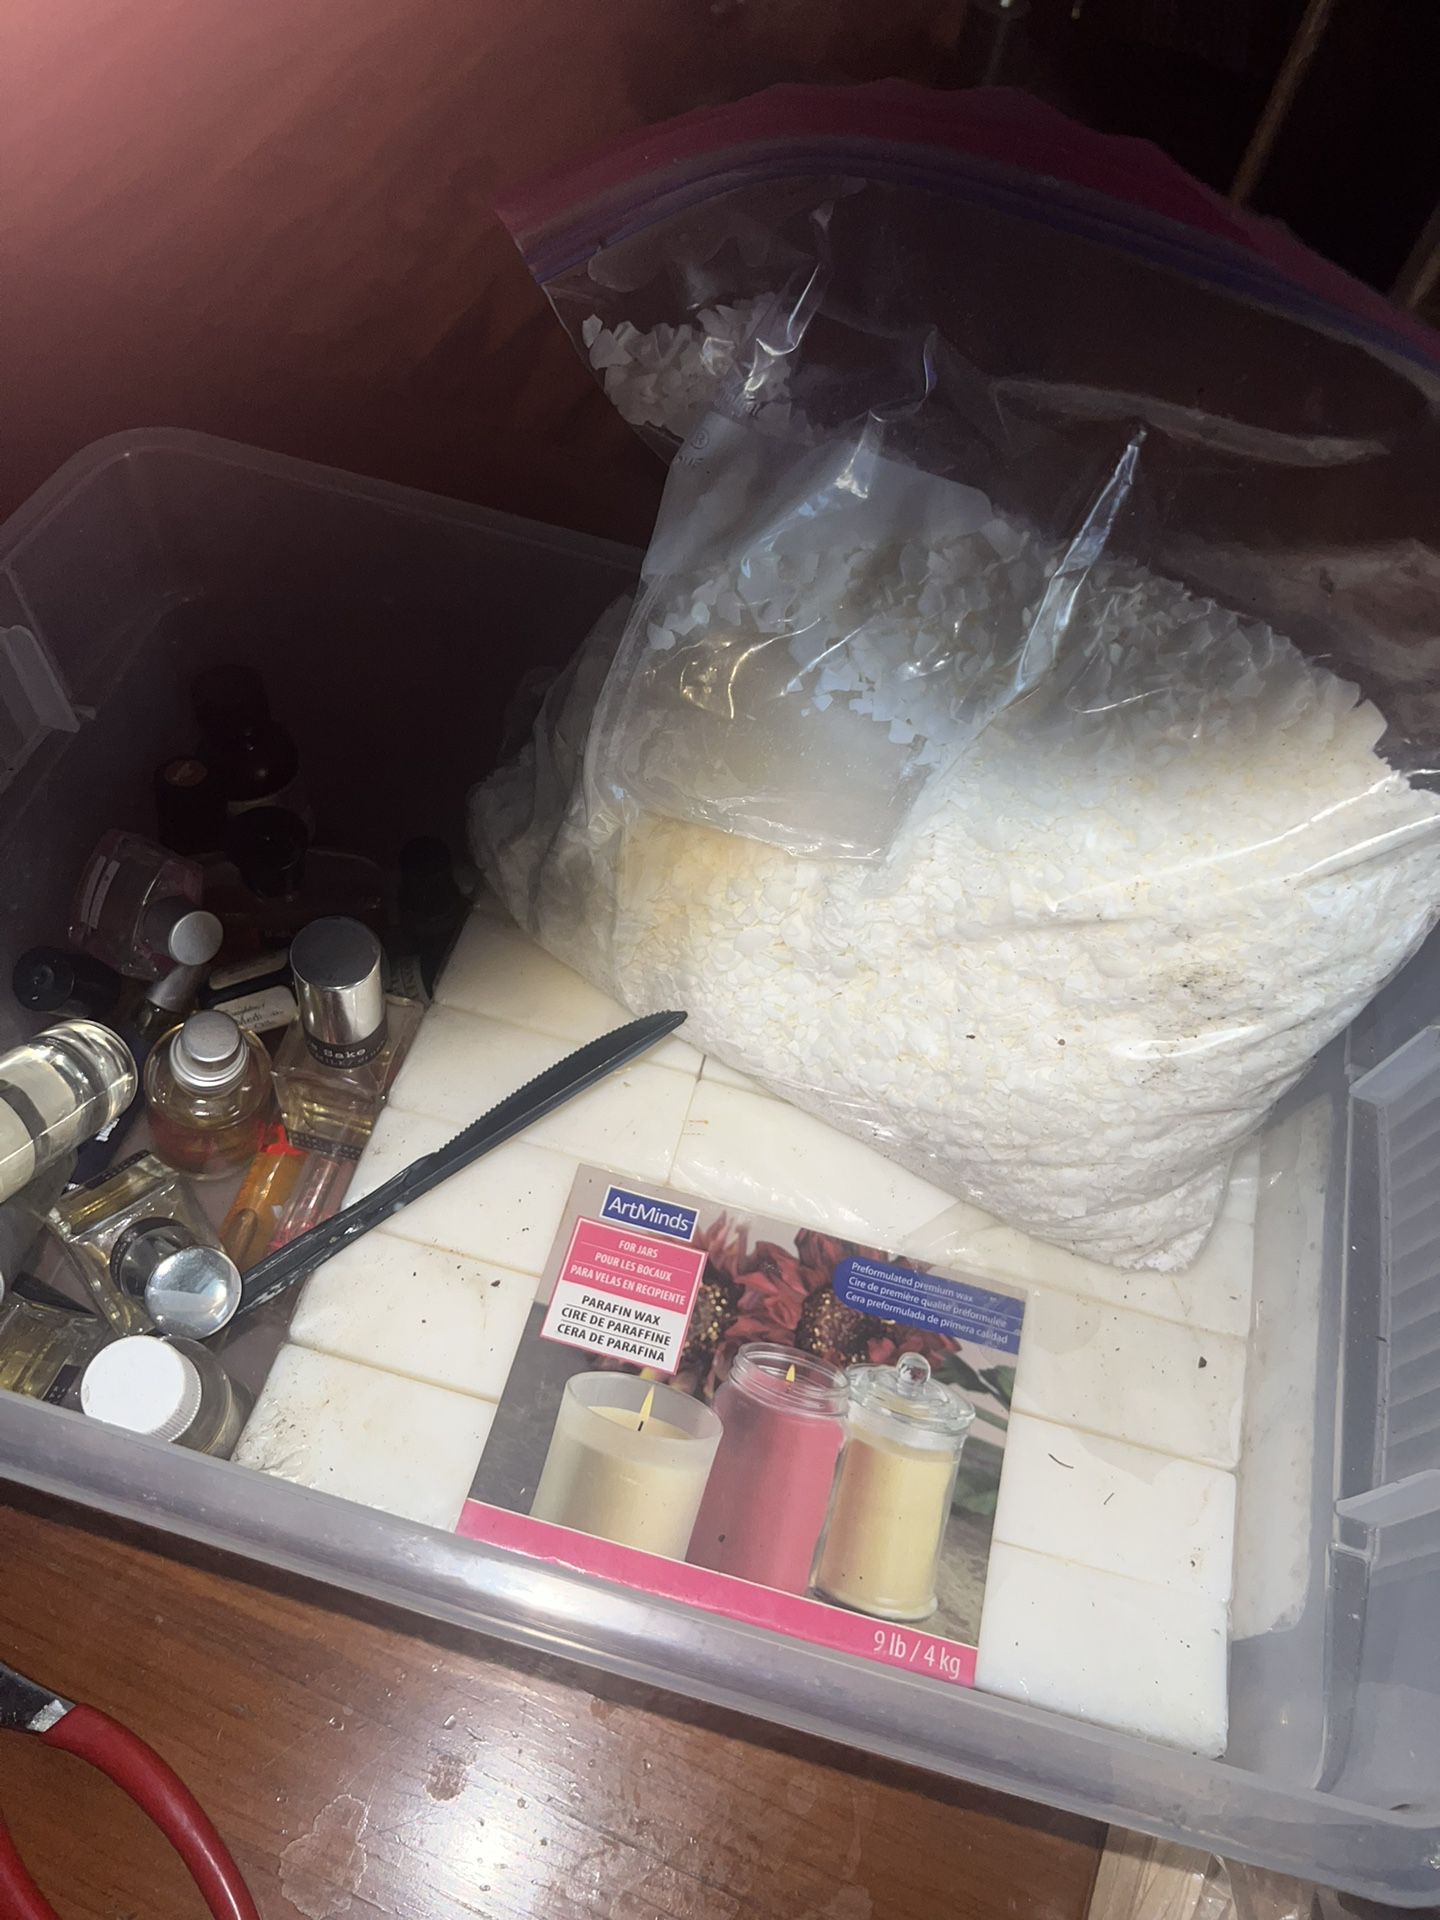 Candle Making Supplies